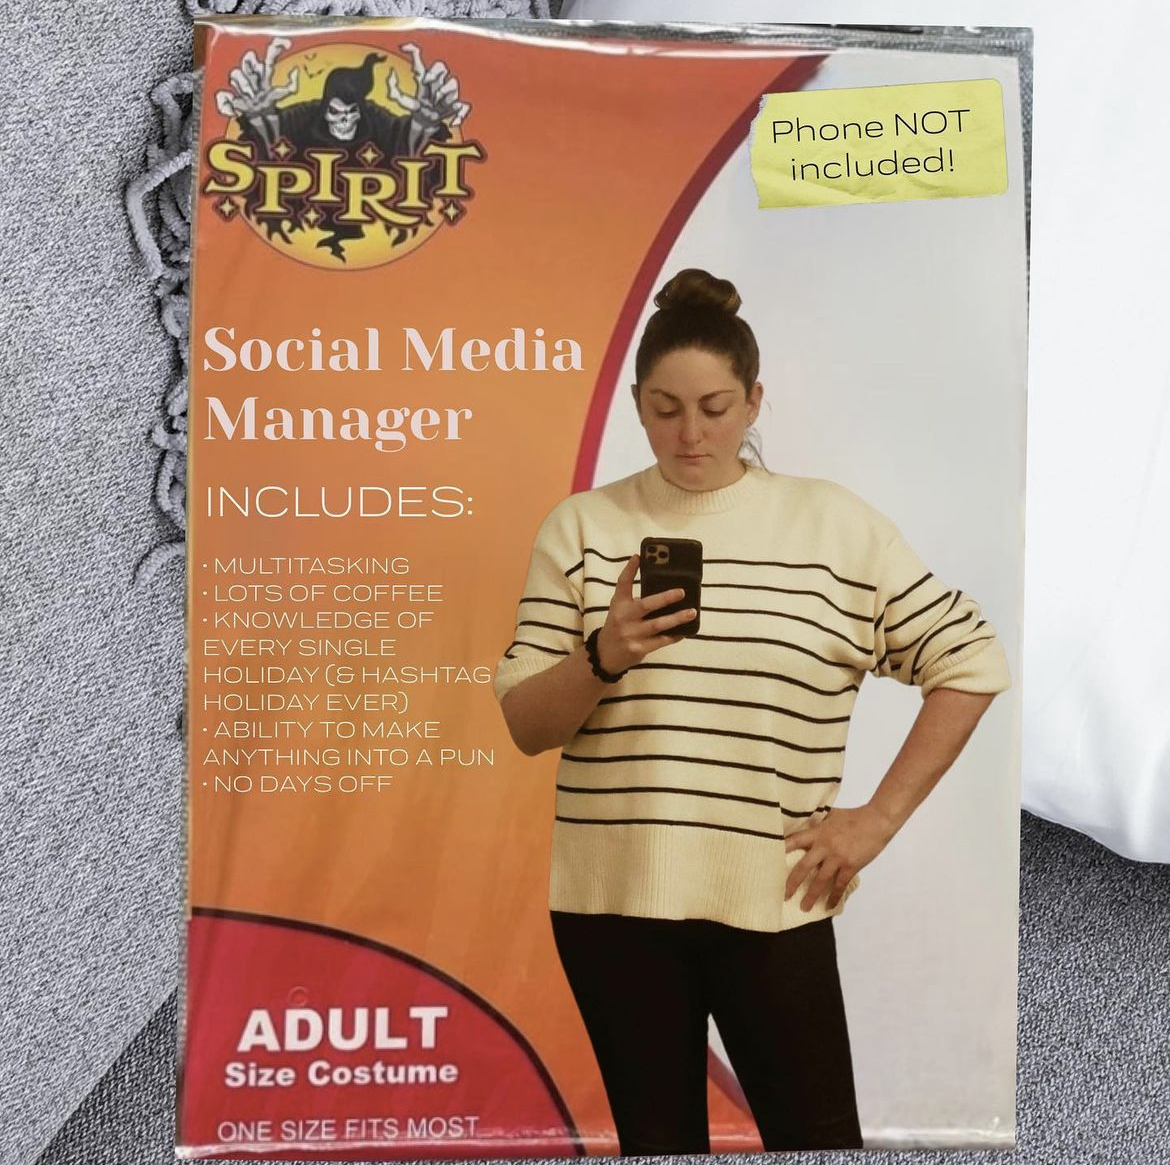 Costume Memes - spirit halloween - Spirit Social Media Manager Includes Multitasking Lots Of Coffee Knowledge Of Every Single Holiday Shashtag Holiday Ever Ability To Make Anything Into A Pun No Days Off Adult Size Costume One Size Fits Most Phone Not inc